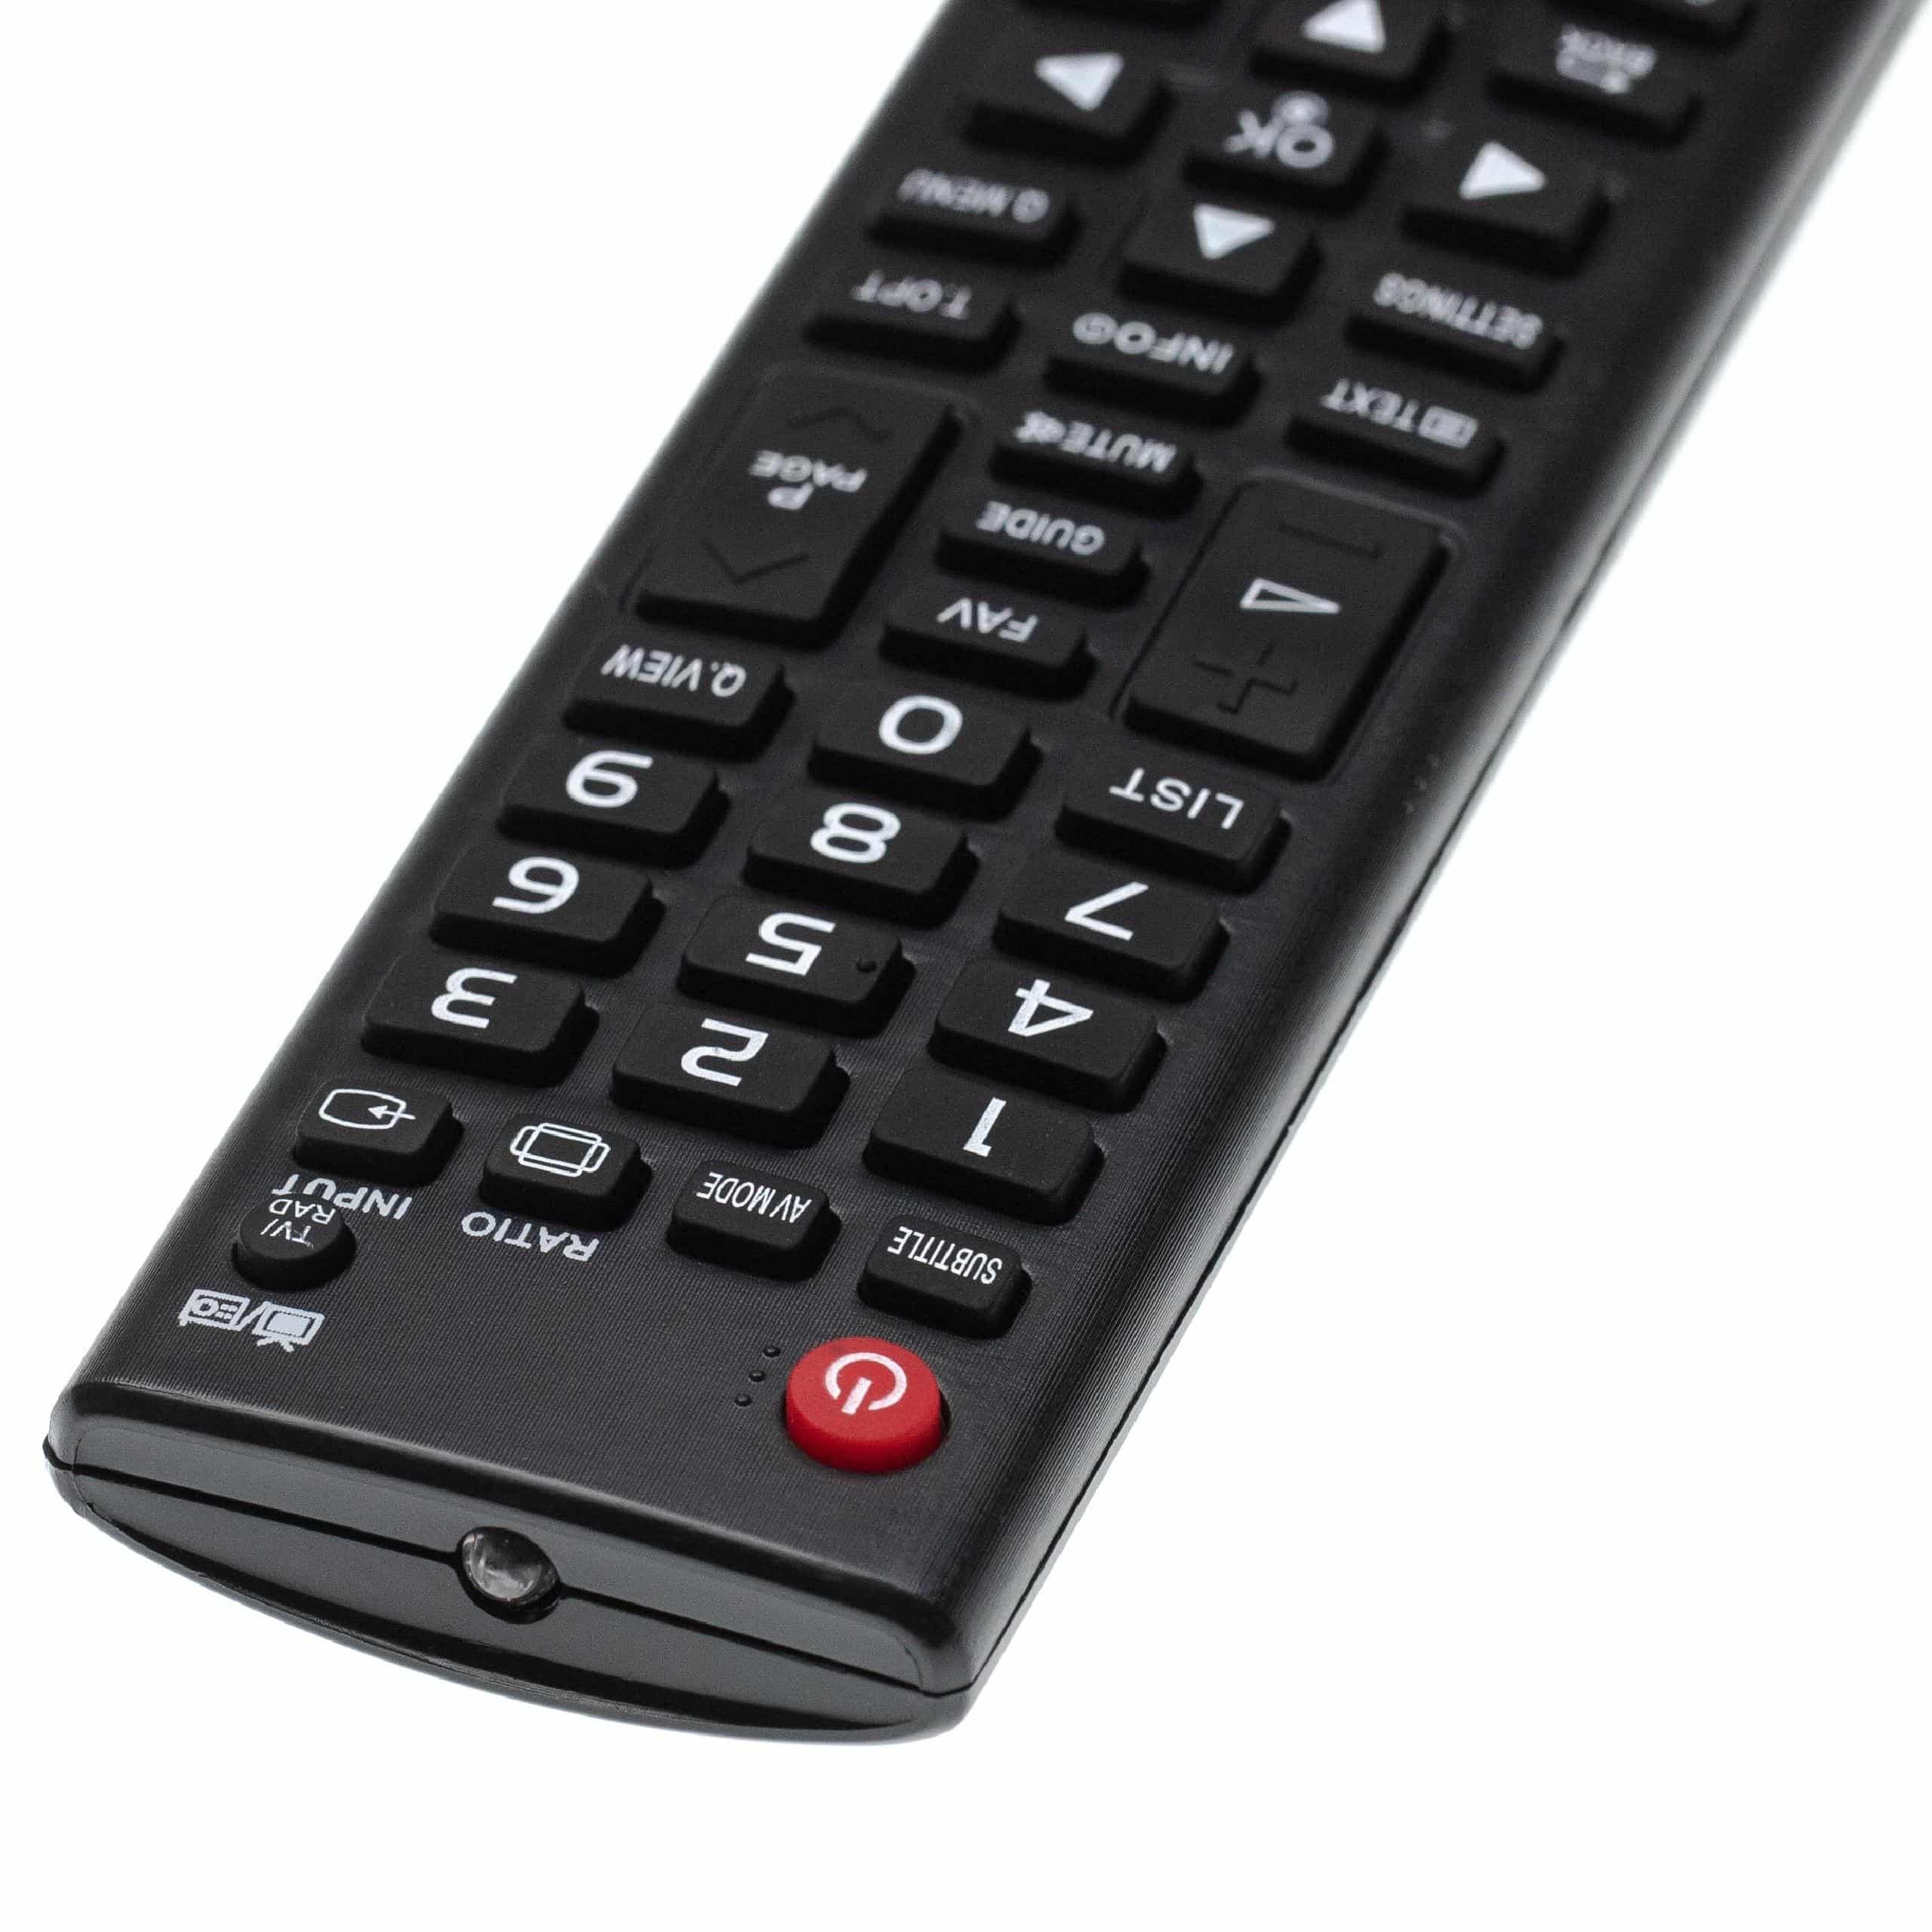 Remote Control replaces LG AKB73715603 for LG TV